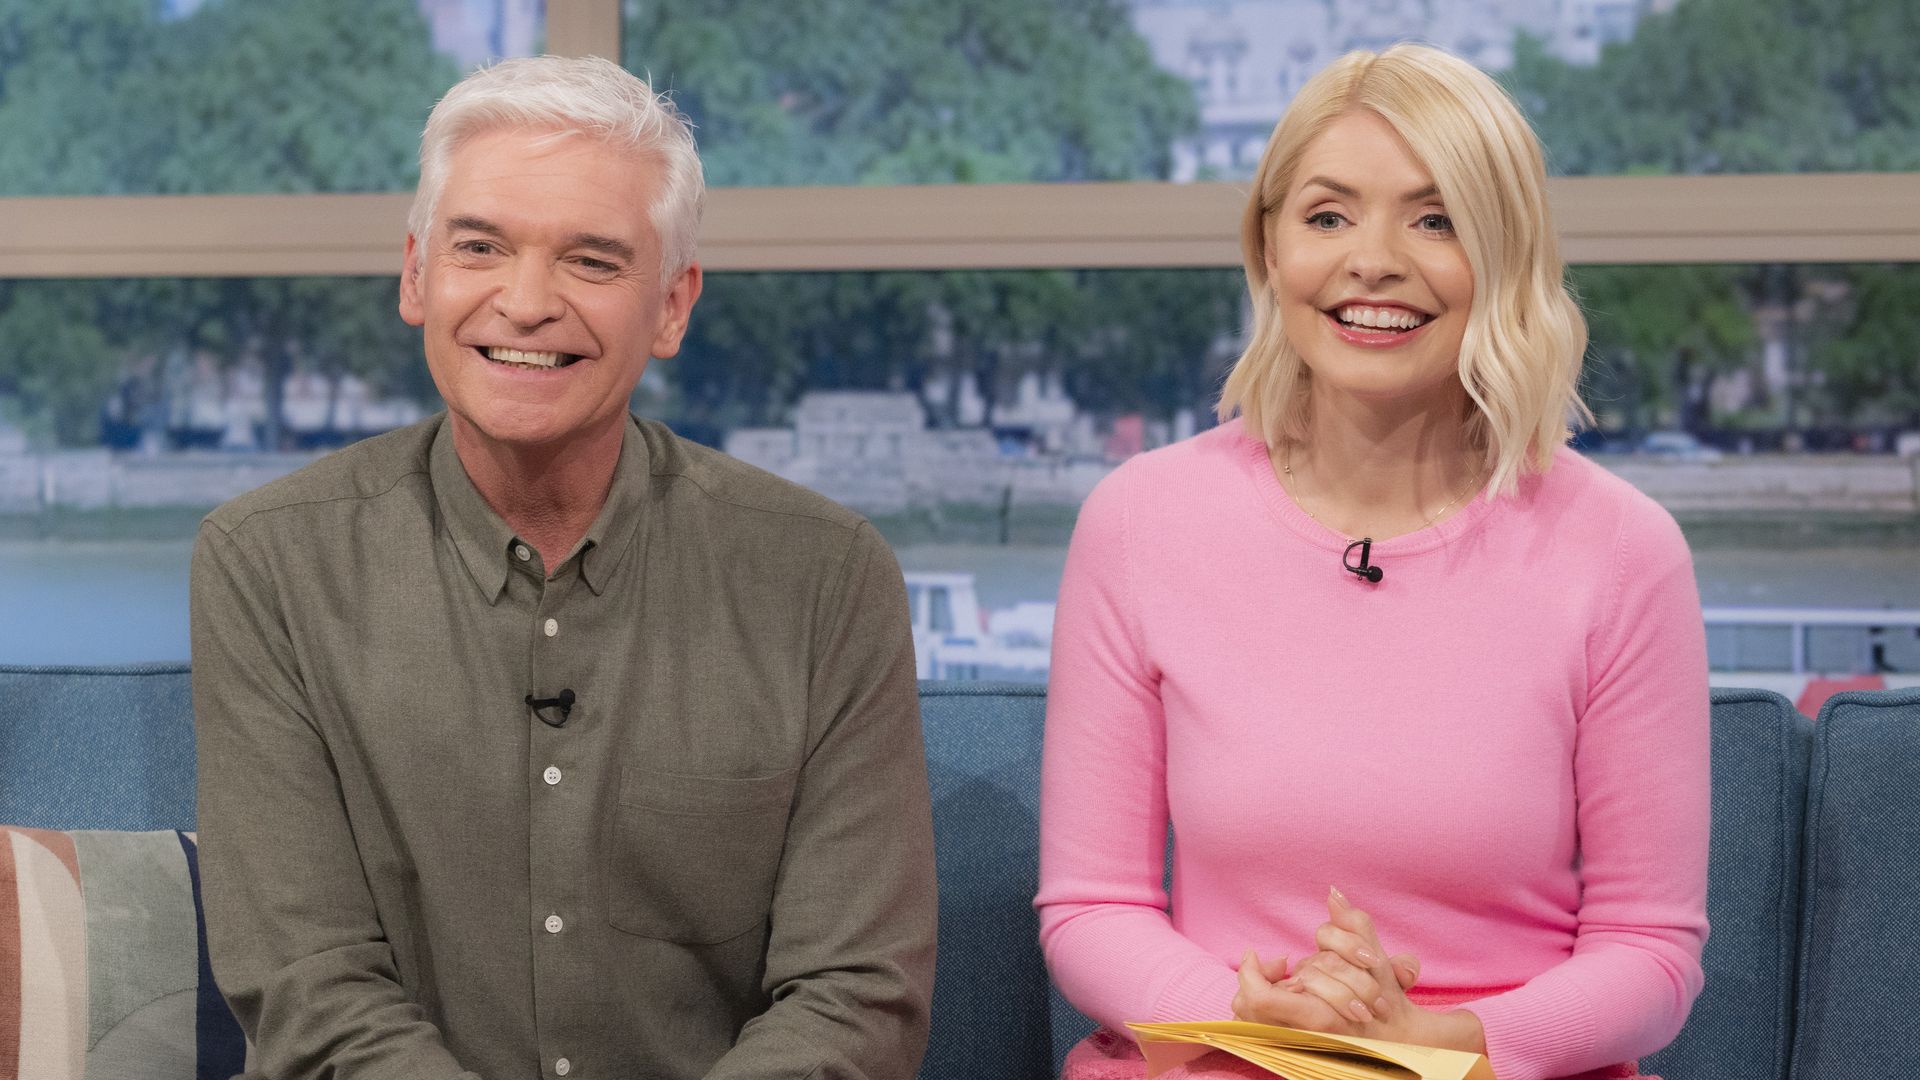 Phillip Schofield and Holly Willoughby on
 This Morning